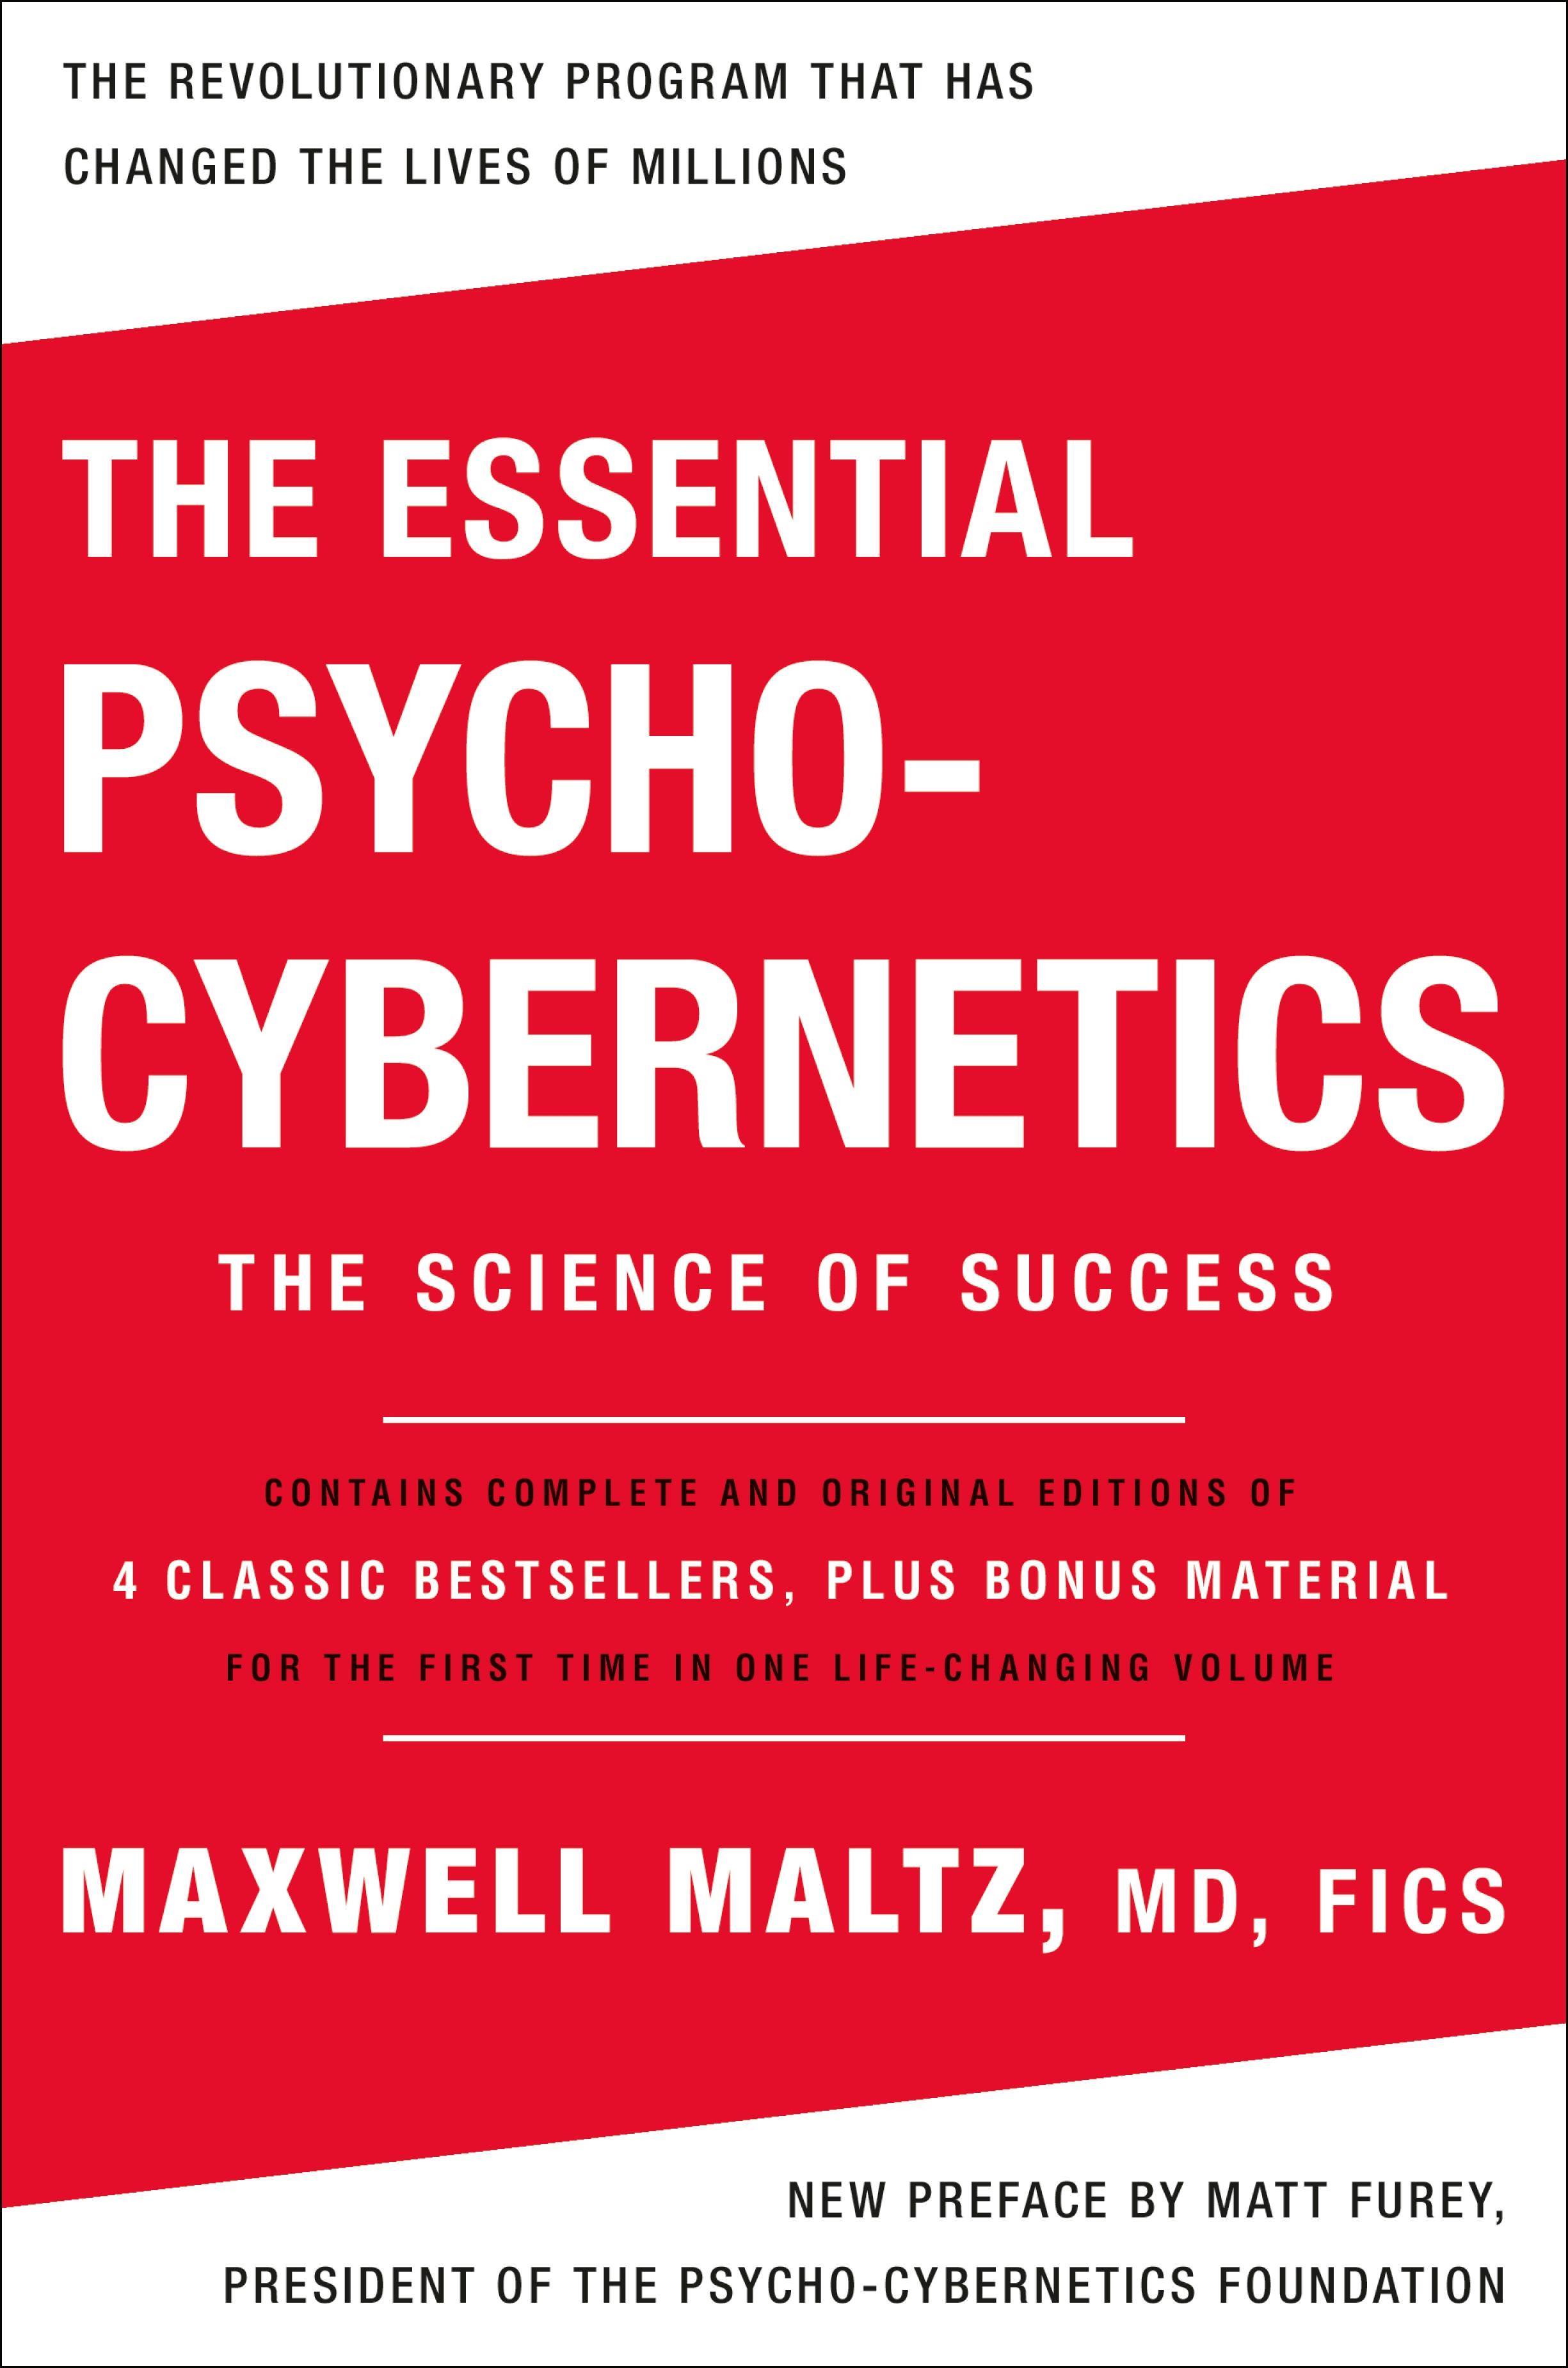 Describes for The Essential Psycho-Cybernetics by authors